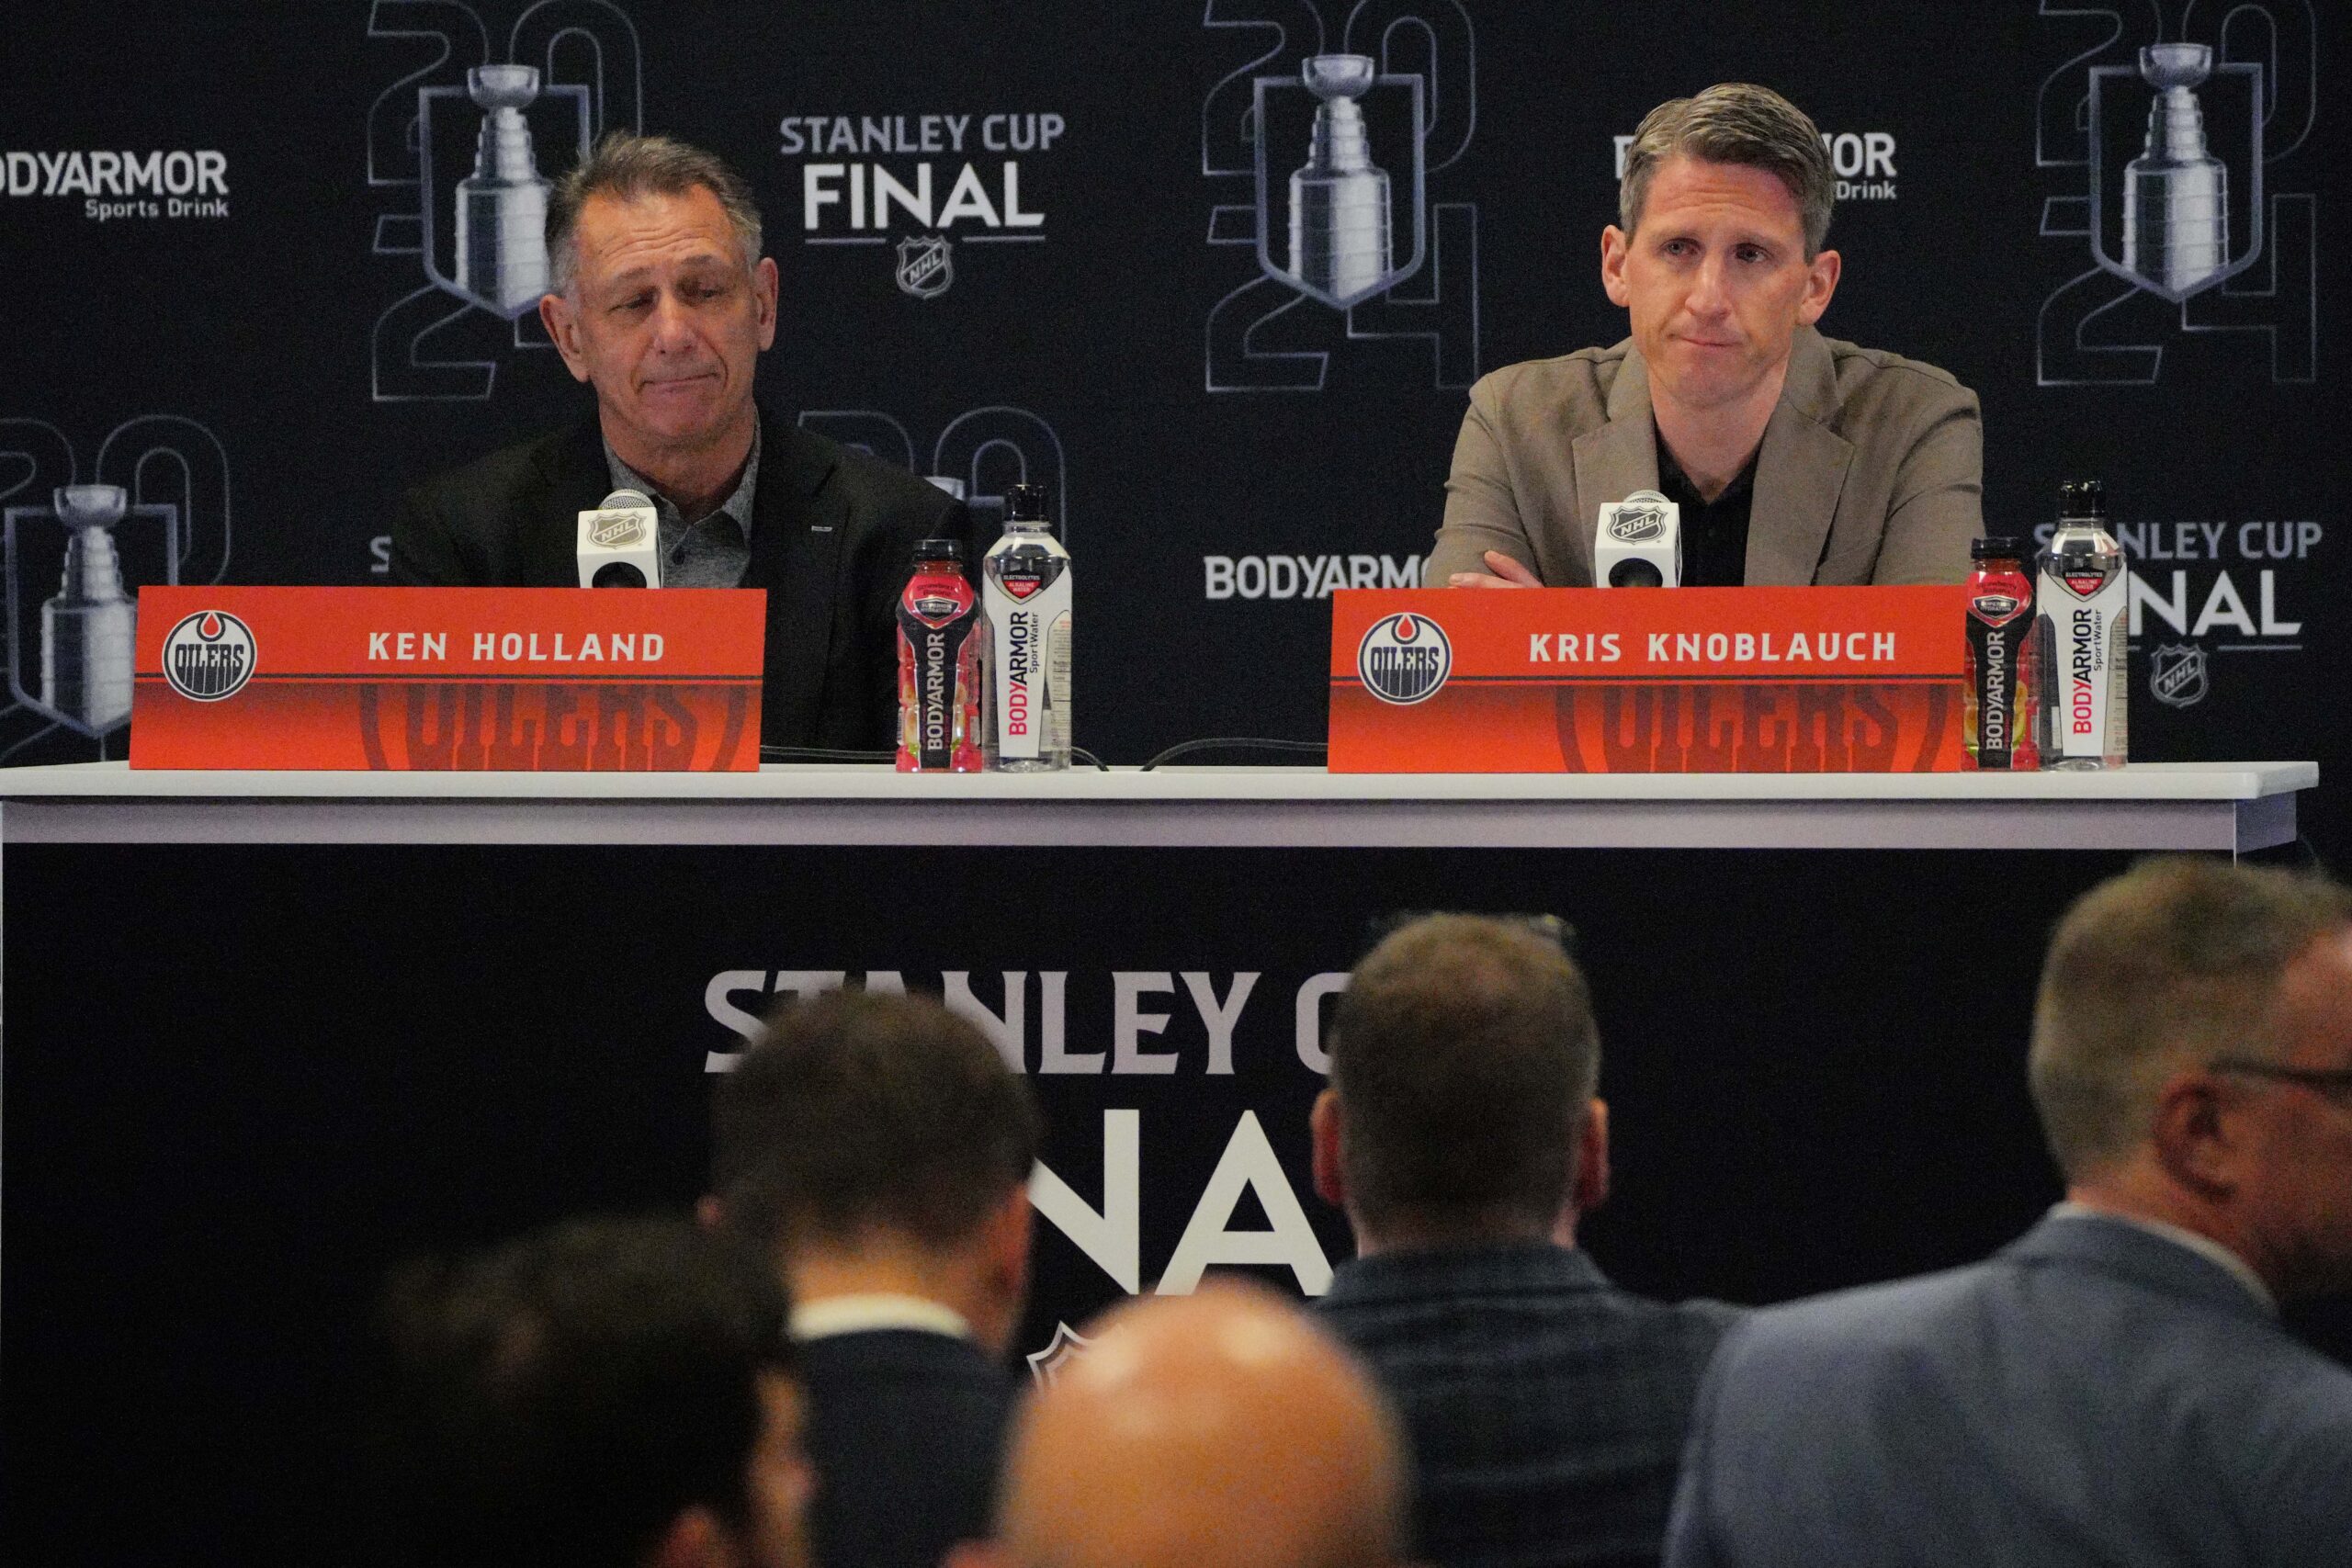 Ken Holland’s Best and Worst Moves as Edmonton Oilers GM